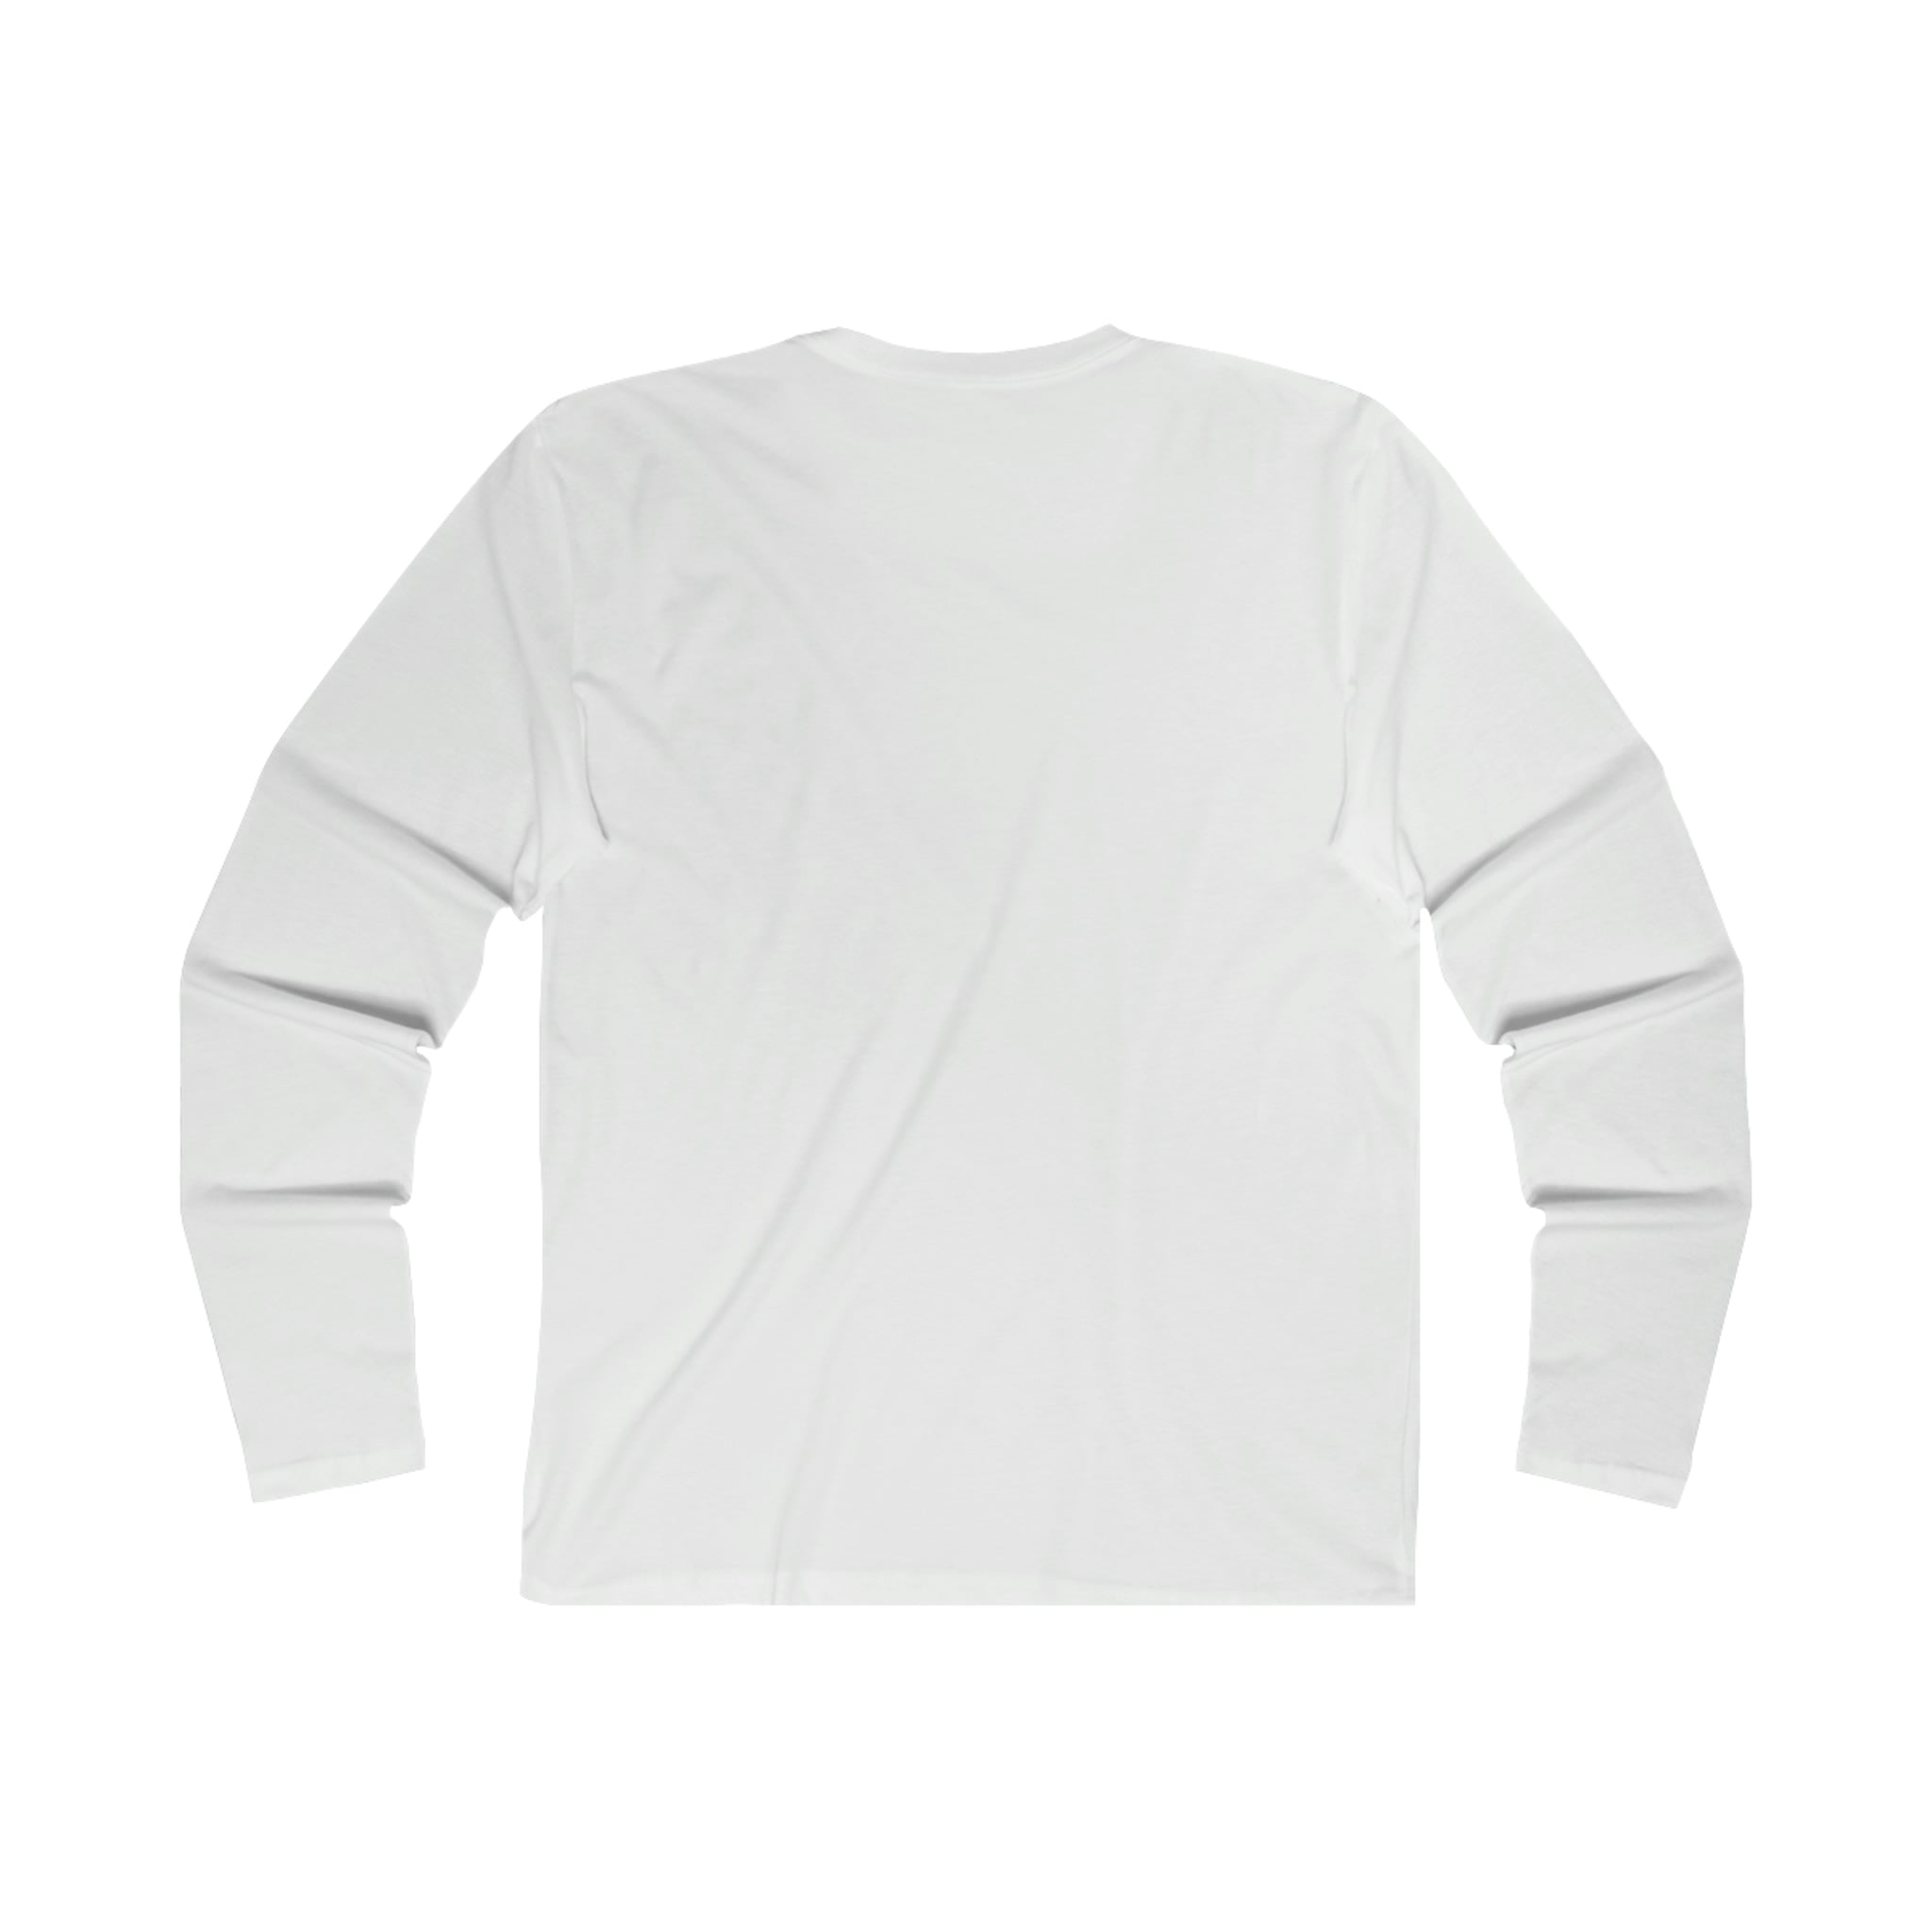 Anacotte Comfortable Men's Long Sleeve Crew Tees for Any Occasion